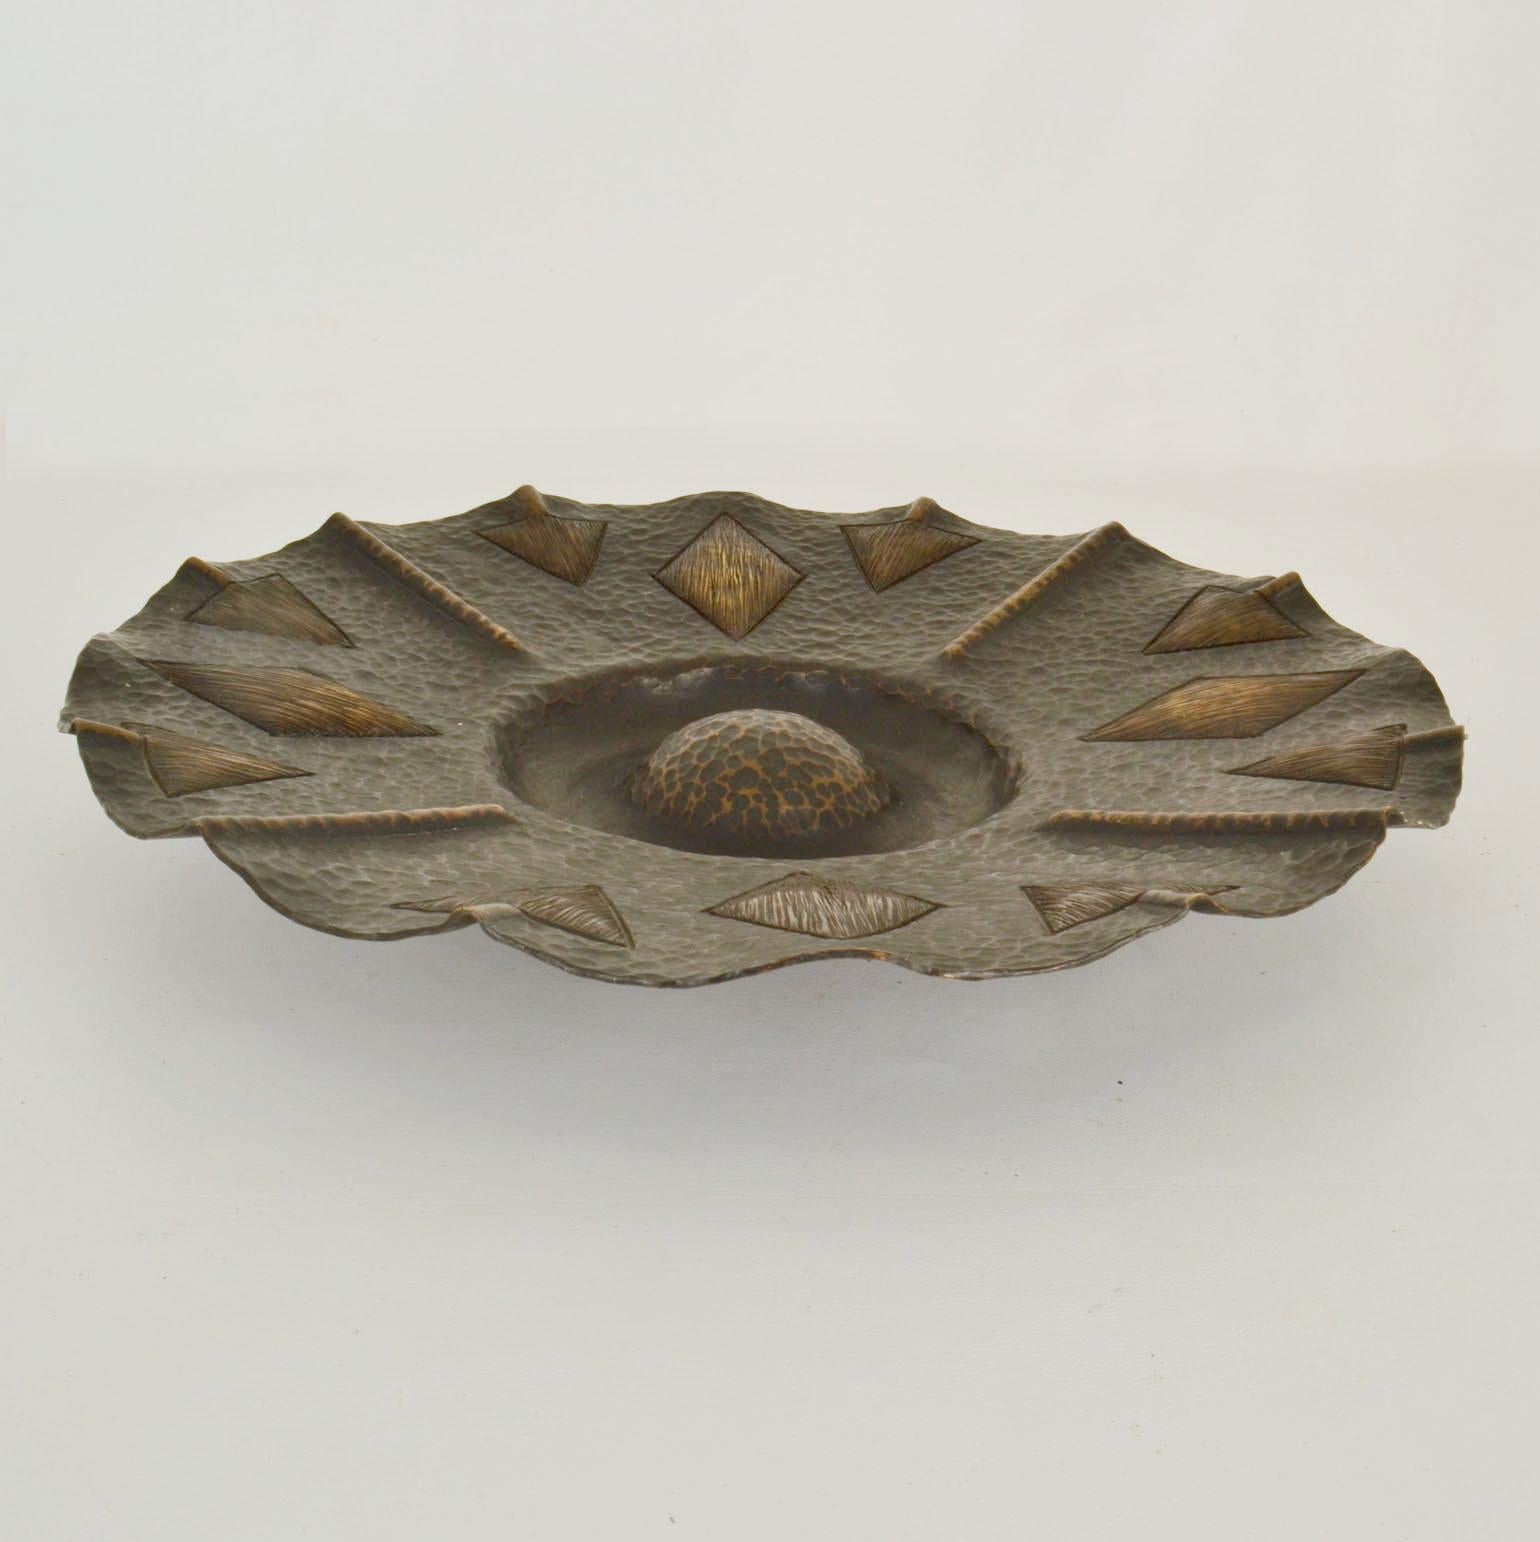 Brass bowl 1950s with flower shape relief and dark patina. Modernist hand-hammered bowl, decorative as a center piece and functional ad a fruit bowl. The hammering creates a decorative geometric pattern and its original patina creating depth to the